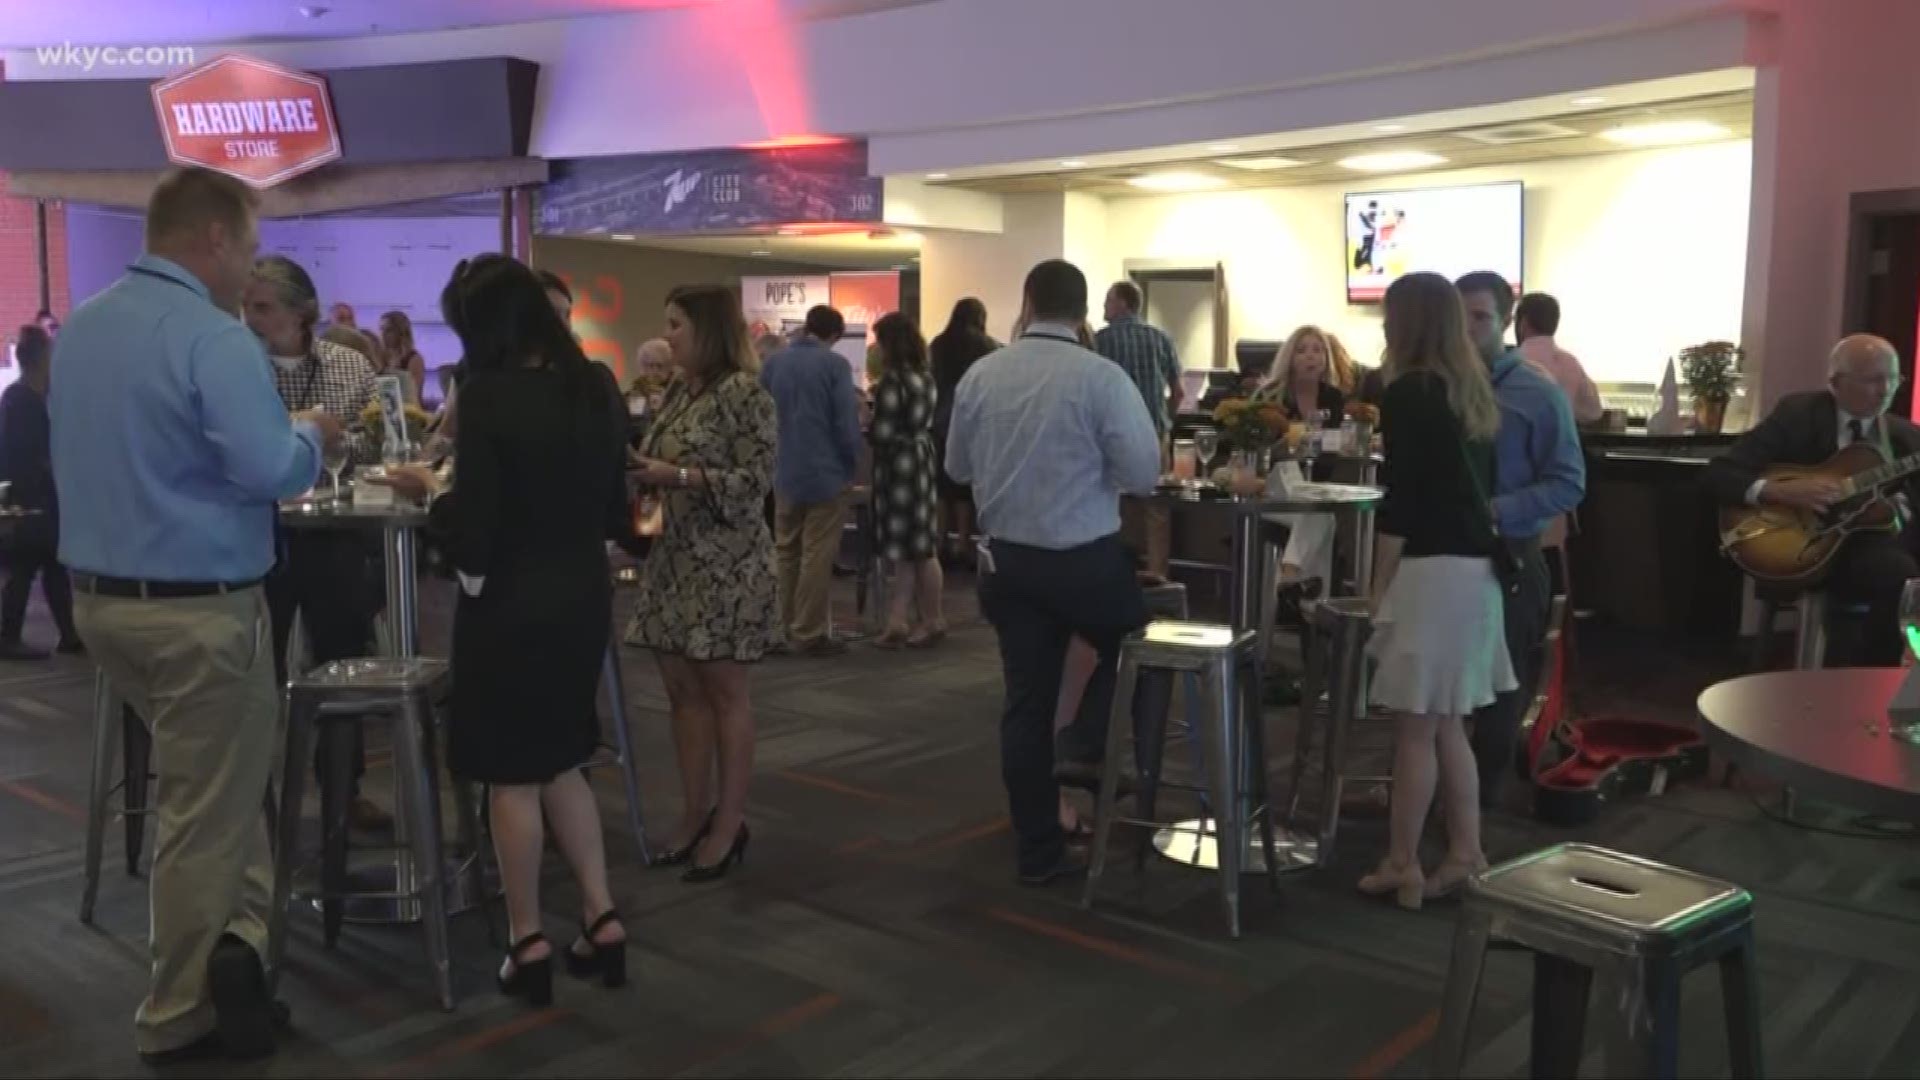 Taste of the Browns raises money for the Cleveland Food Bank